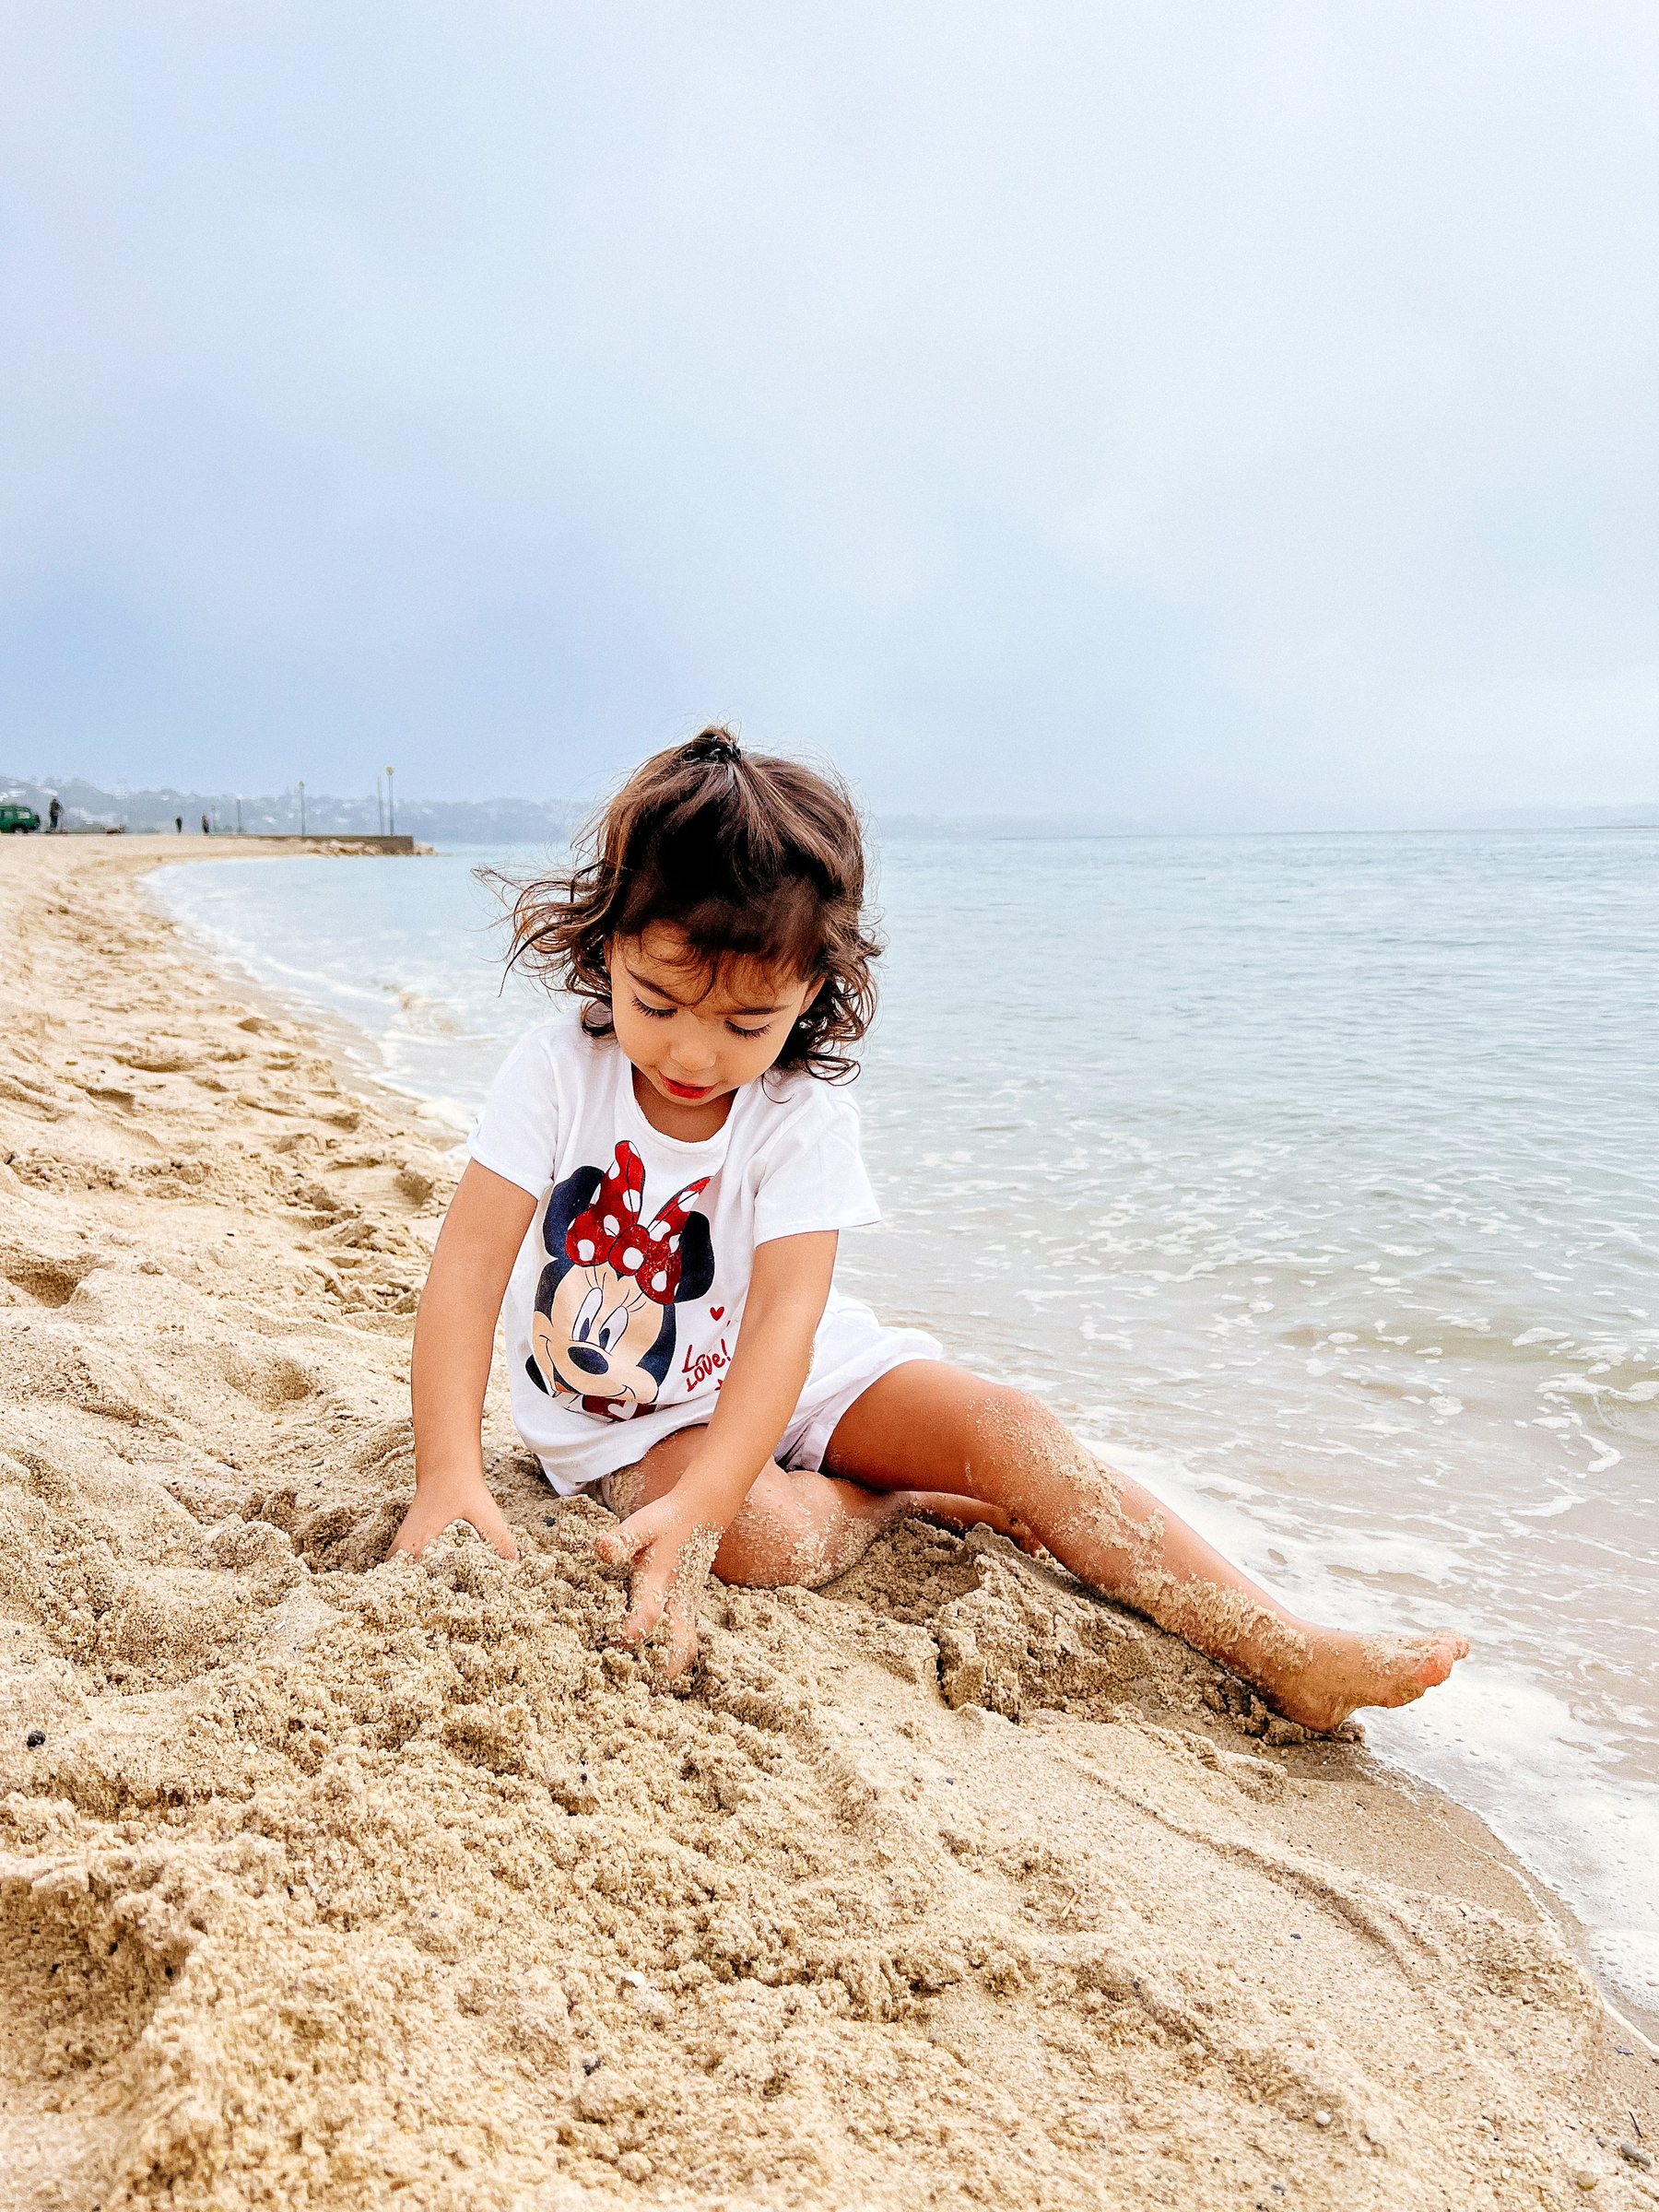 Toddler by the sea, playing in the sand